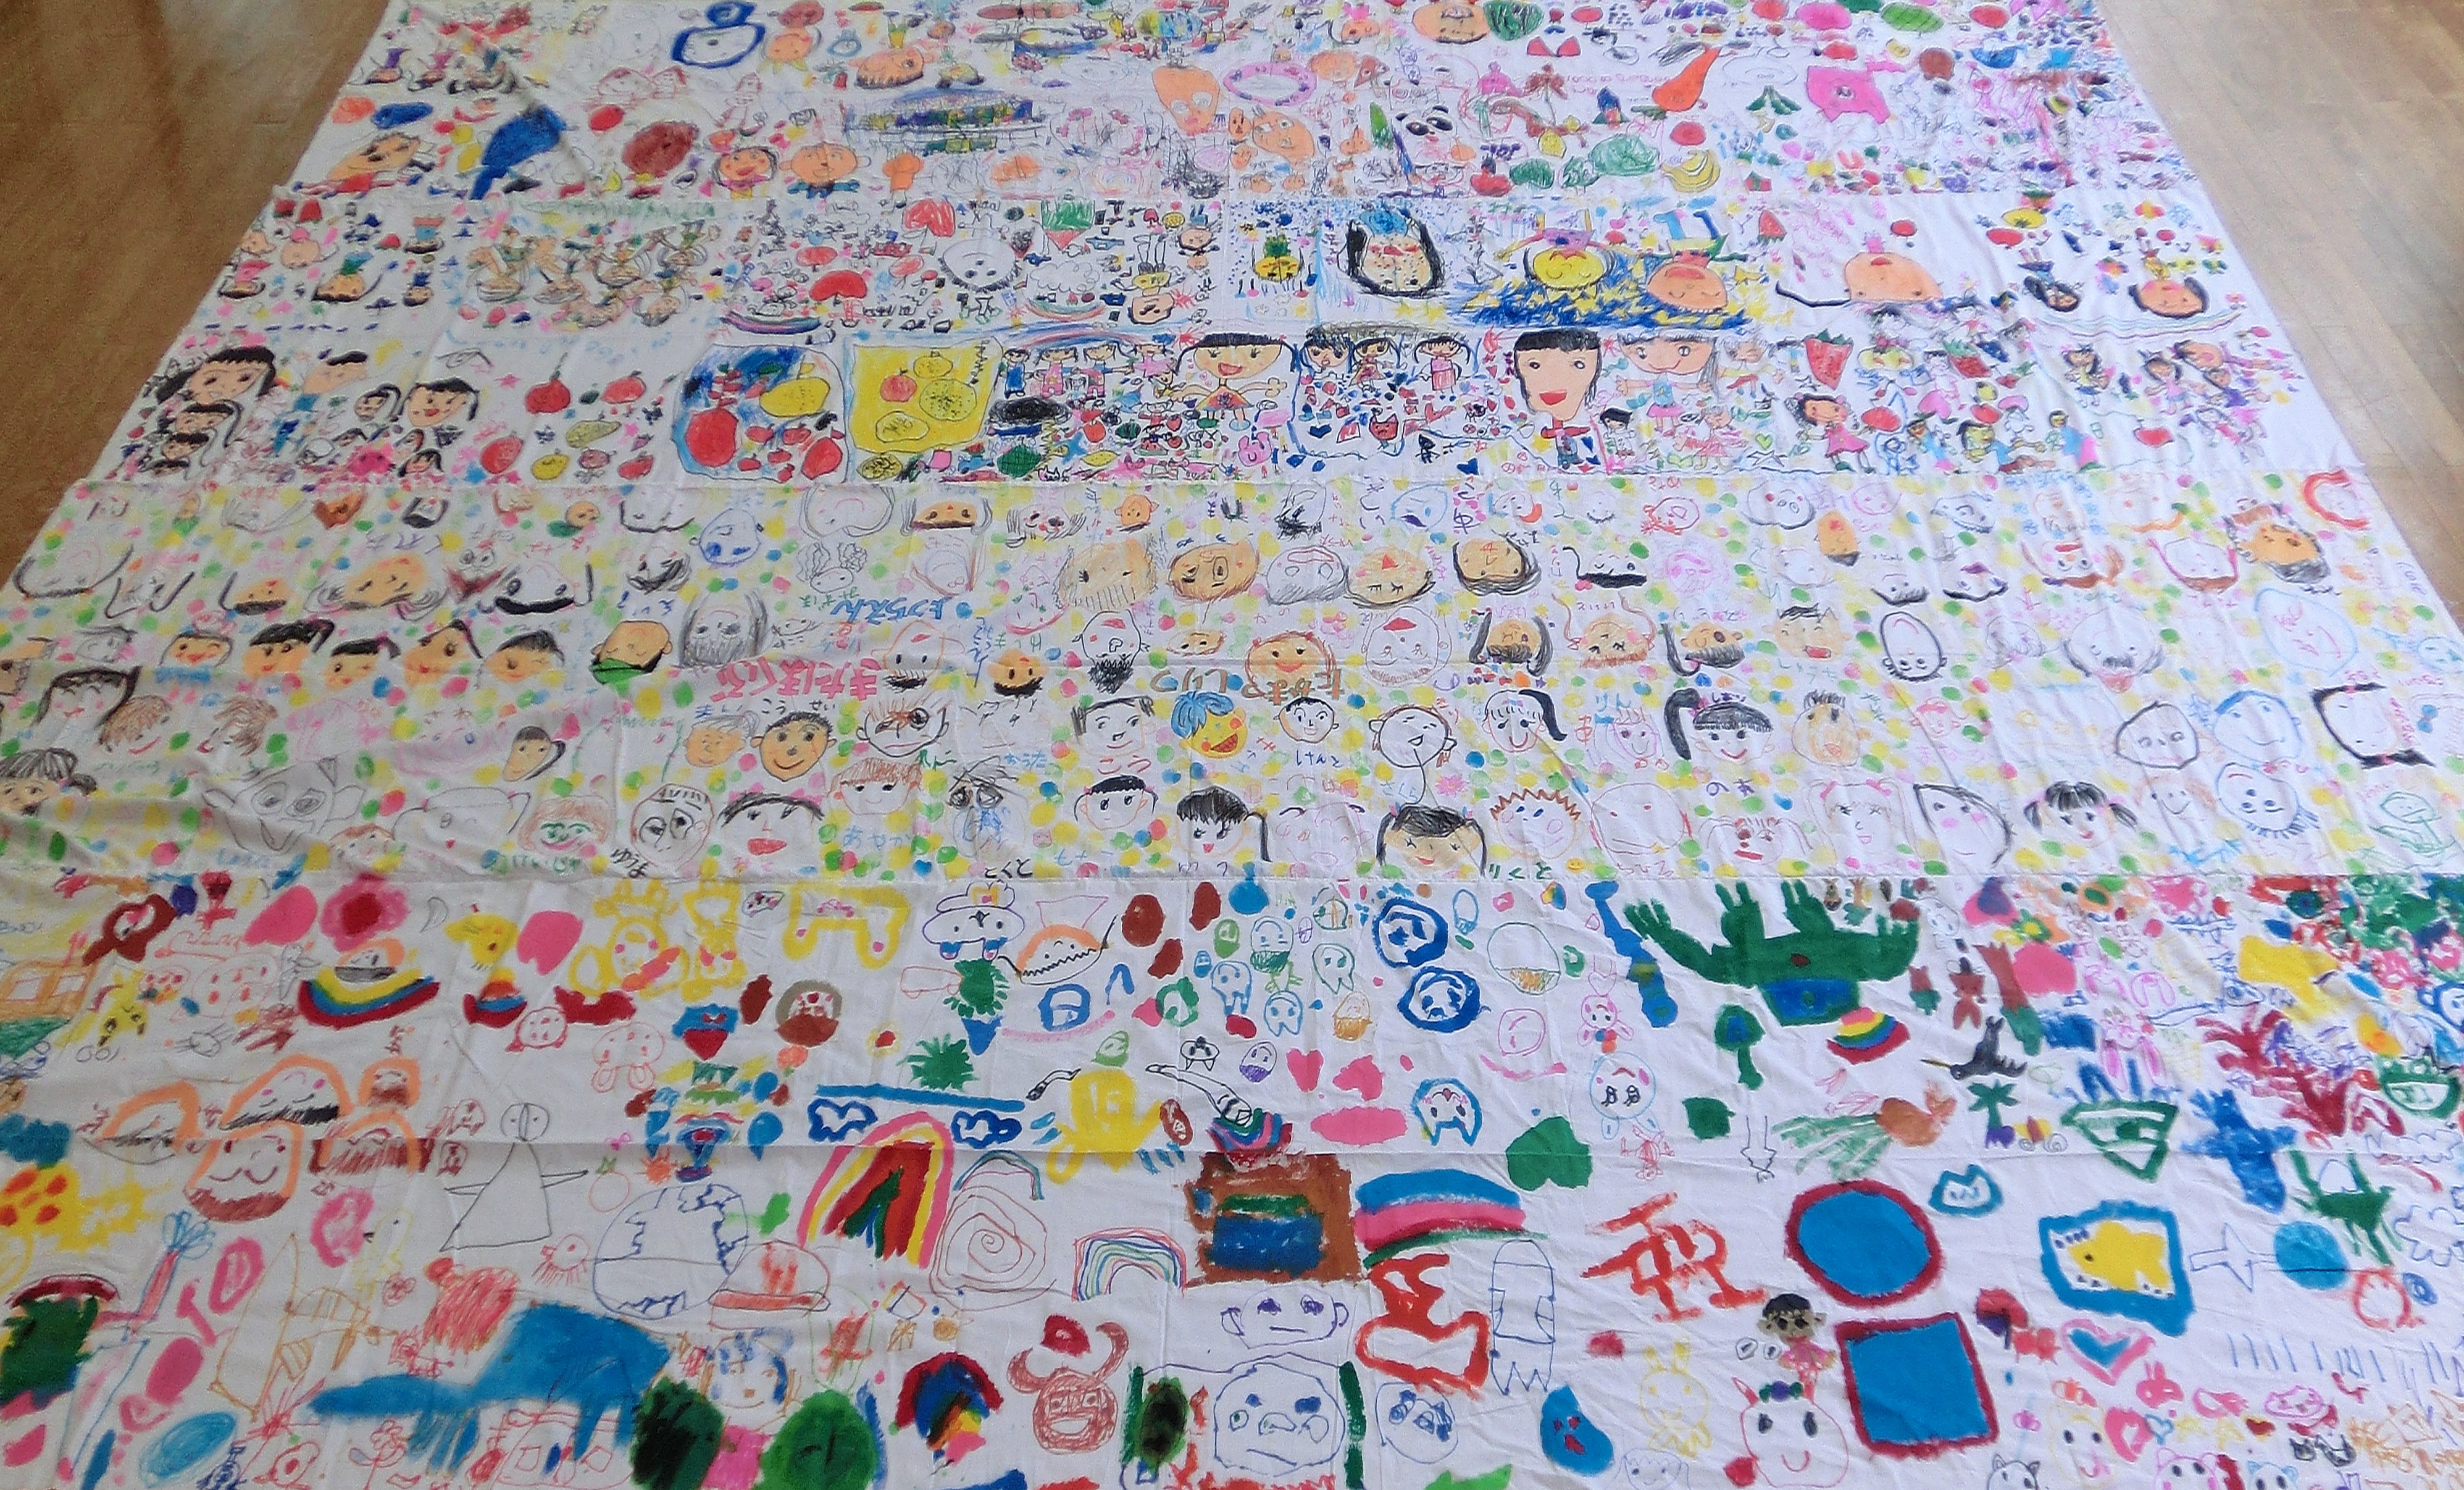 Created “The Biggest Painting in the World 2012 Paintings from Every Prefecture in Japan, in Takamatsu city”.